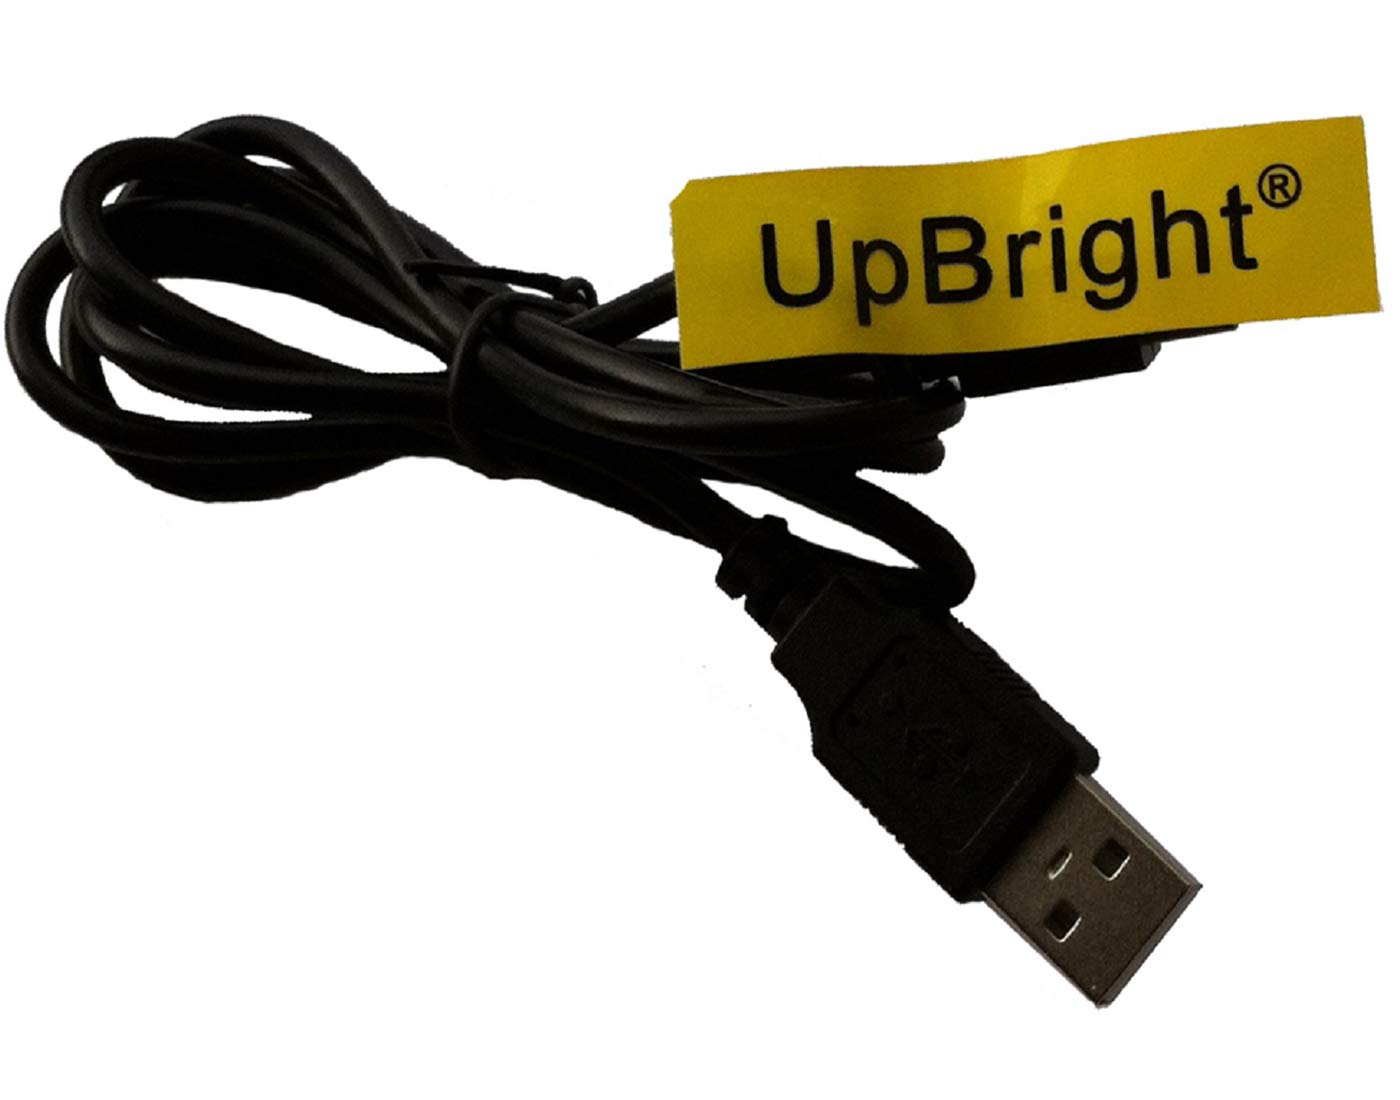 UPBRIGHT USB 5V DC Charging Cable Cord Replacement for Sony SRS-X33 RC BC WC LC Speaker SRS-XB21 SRS-XB31 XB20 XB10 SRS-XB20 SRS-XB10 SRSBTV5 SRS-X2 SRS-X3 SRS-X11 SRSXB21 SRSXB31 SRSX2 SRSX3 SRSX11